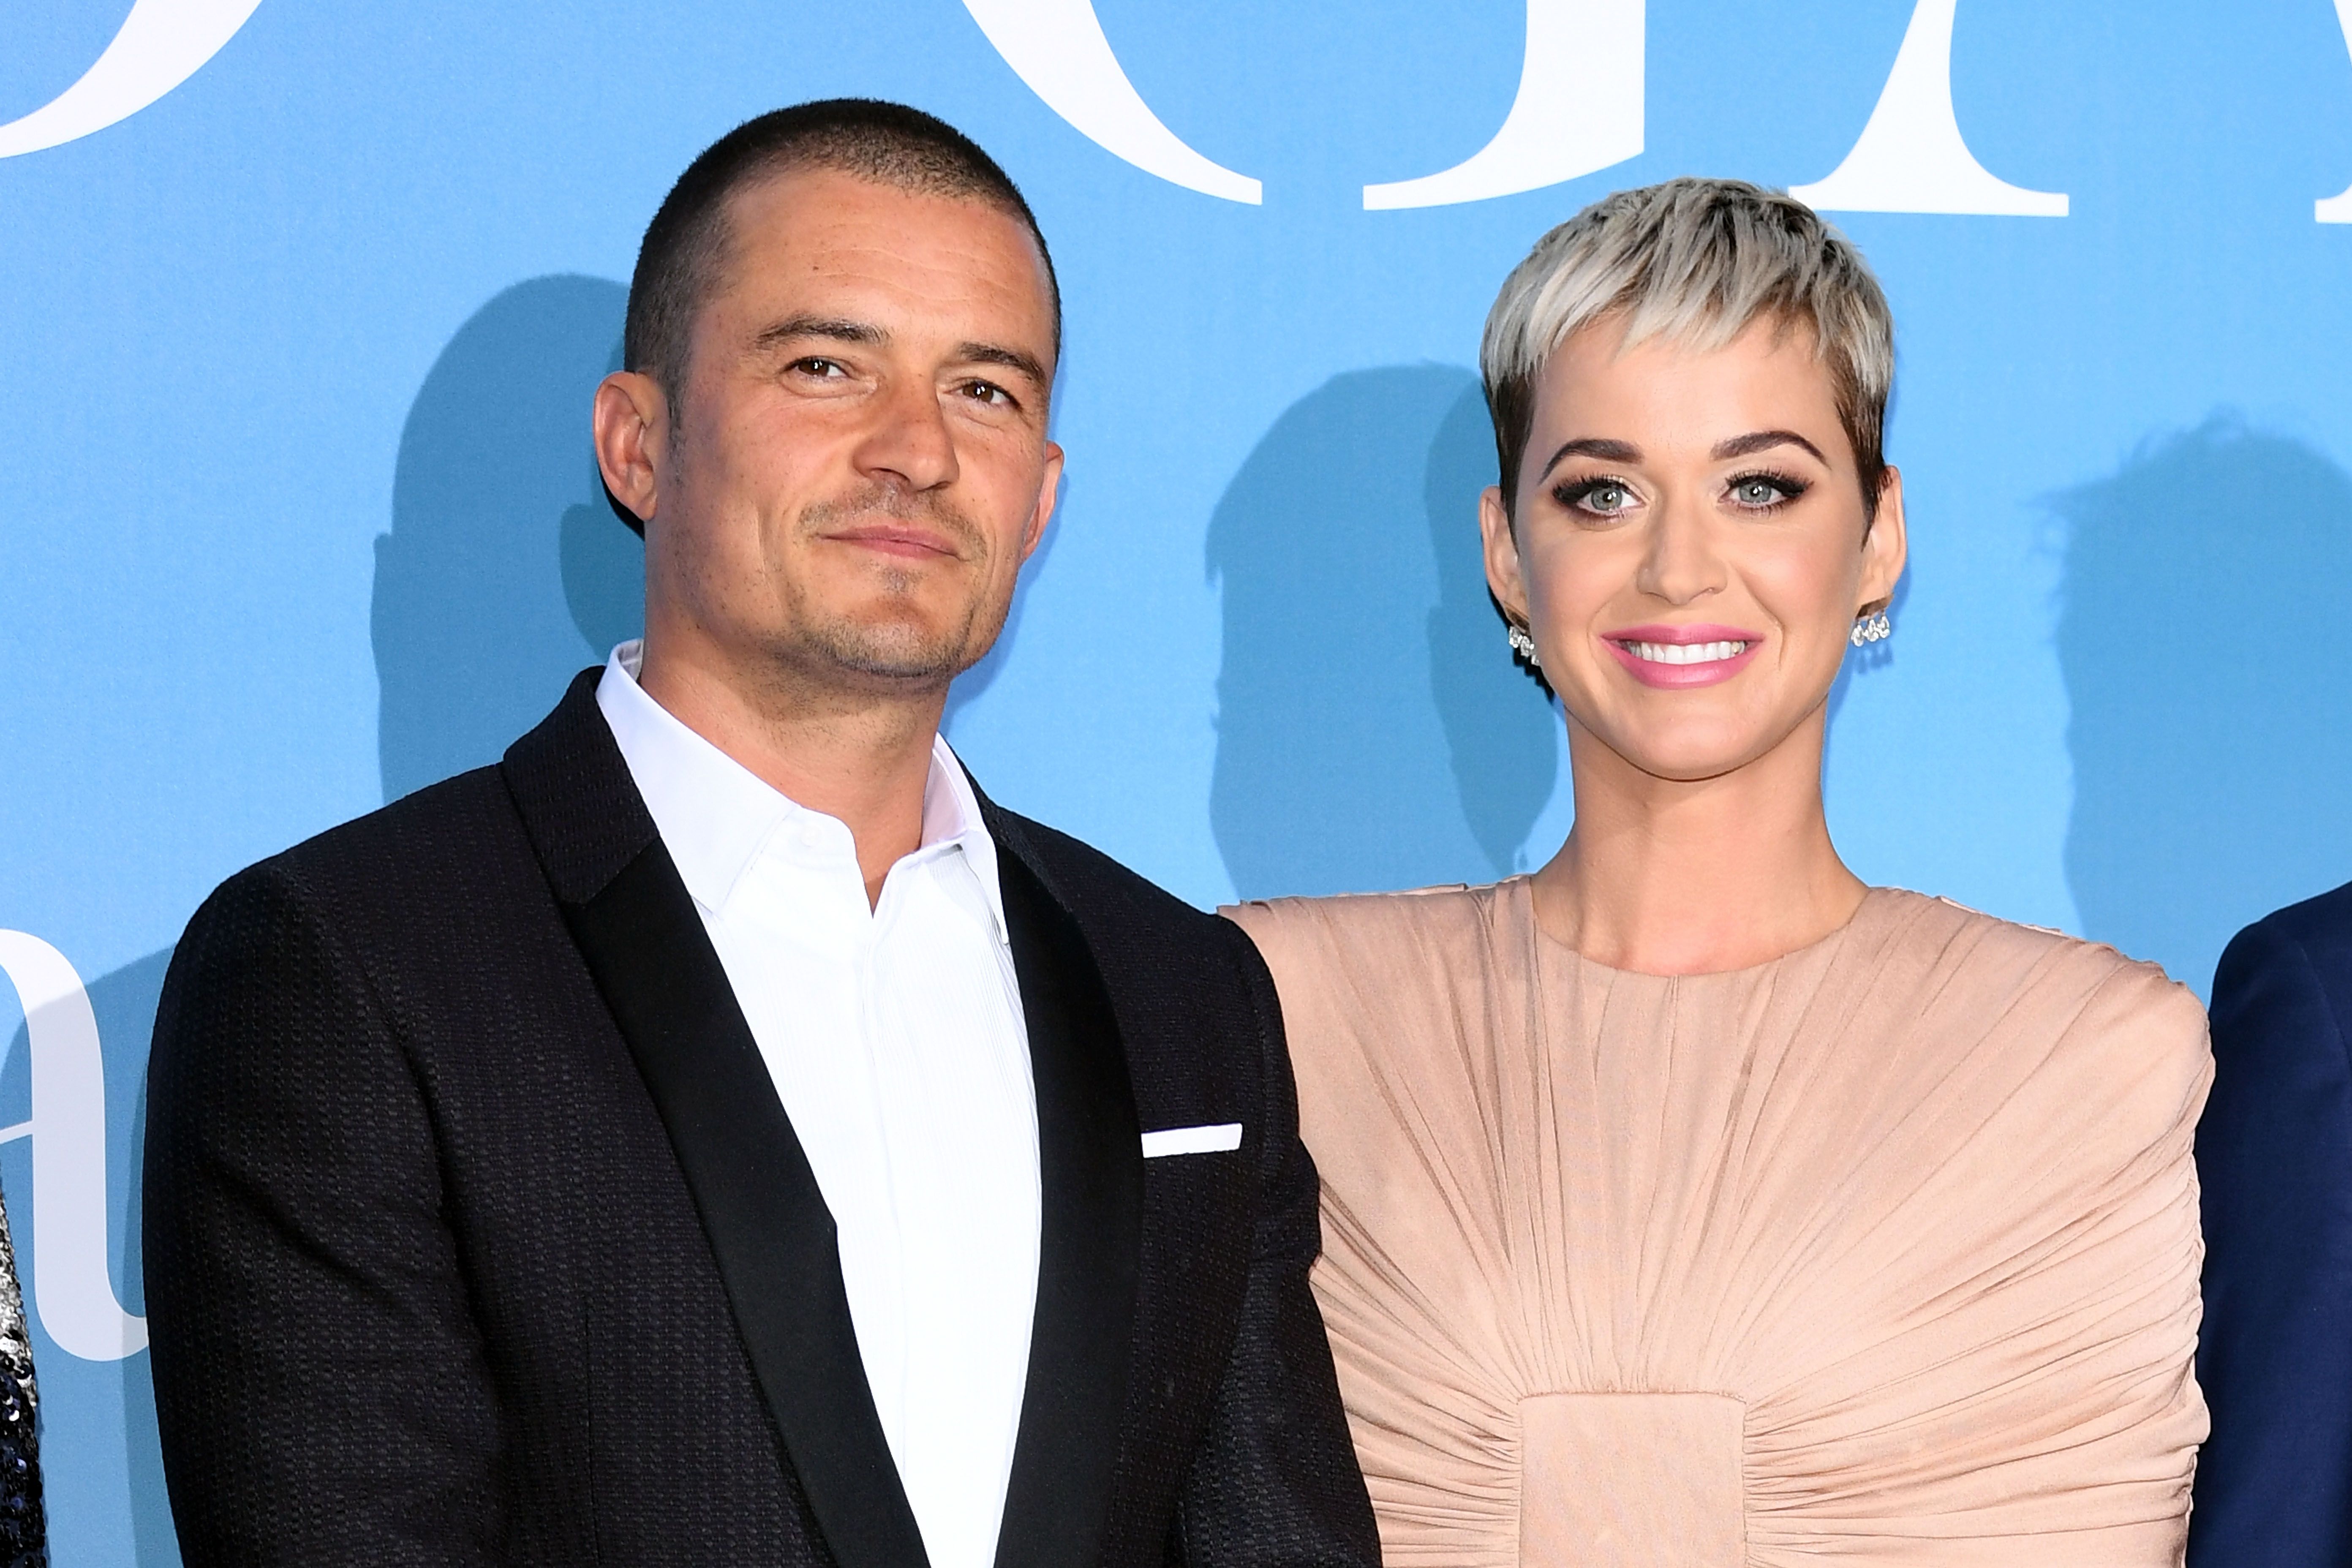 Orlando Bloom and Katy Perry at the Gala for the Global Ocean hosted by H.S.H. Prince Albert II of Monaco on September 26, 2018, in Monte-Carlo, Monaco | Photo: Daniele Venturelli/Getty Images